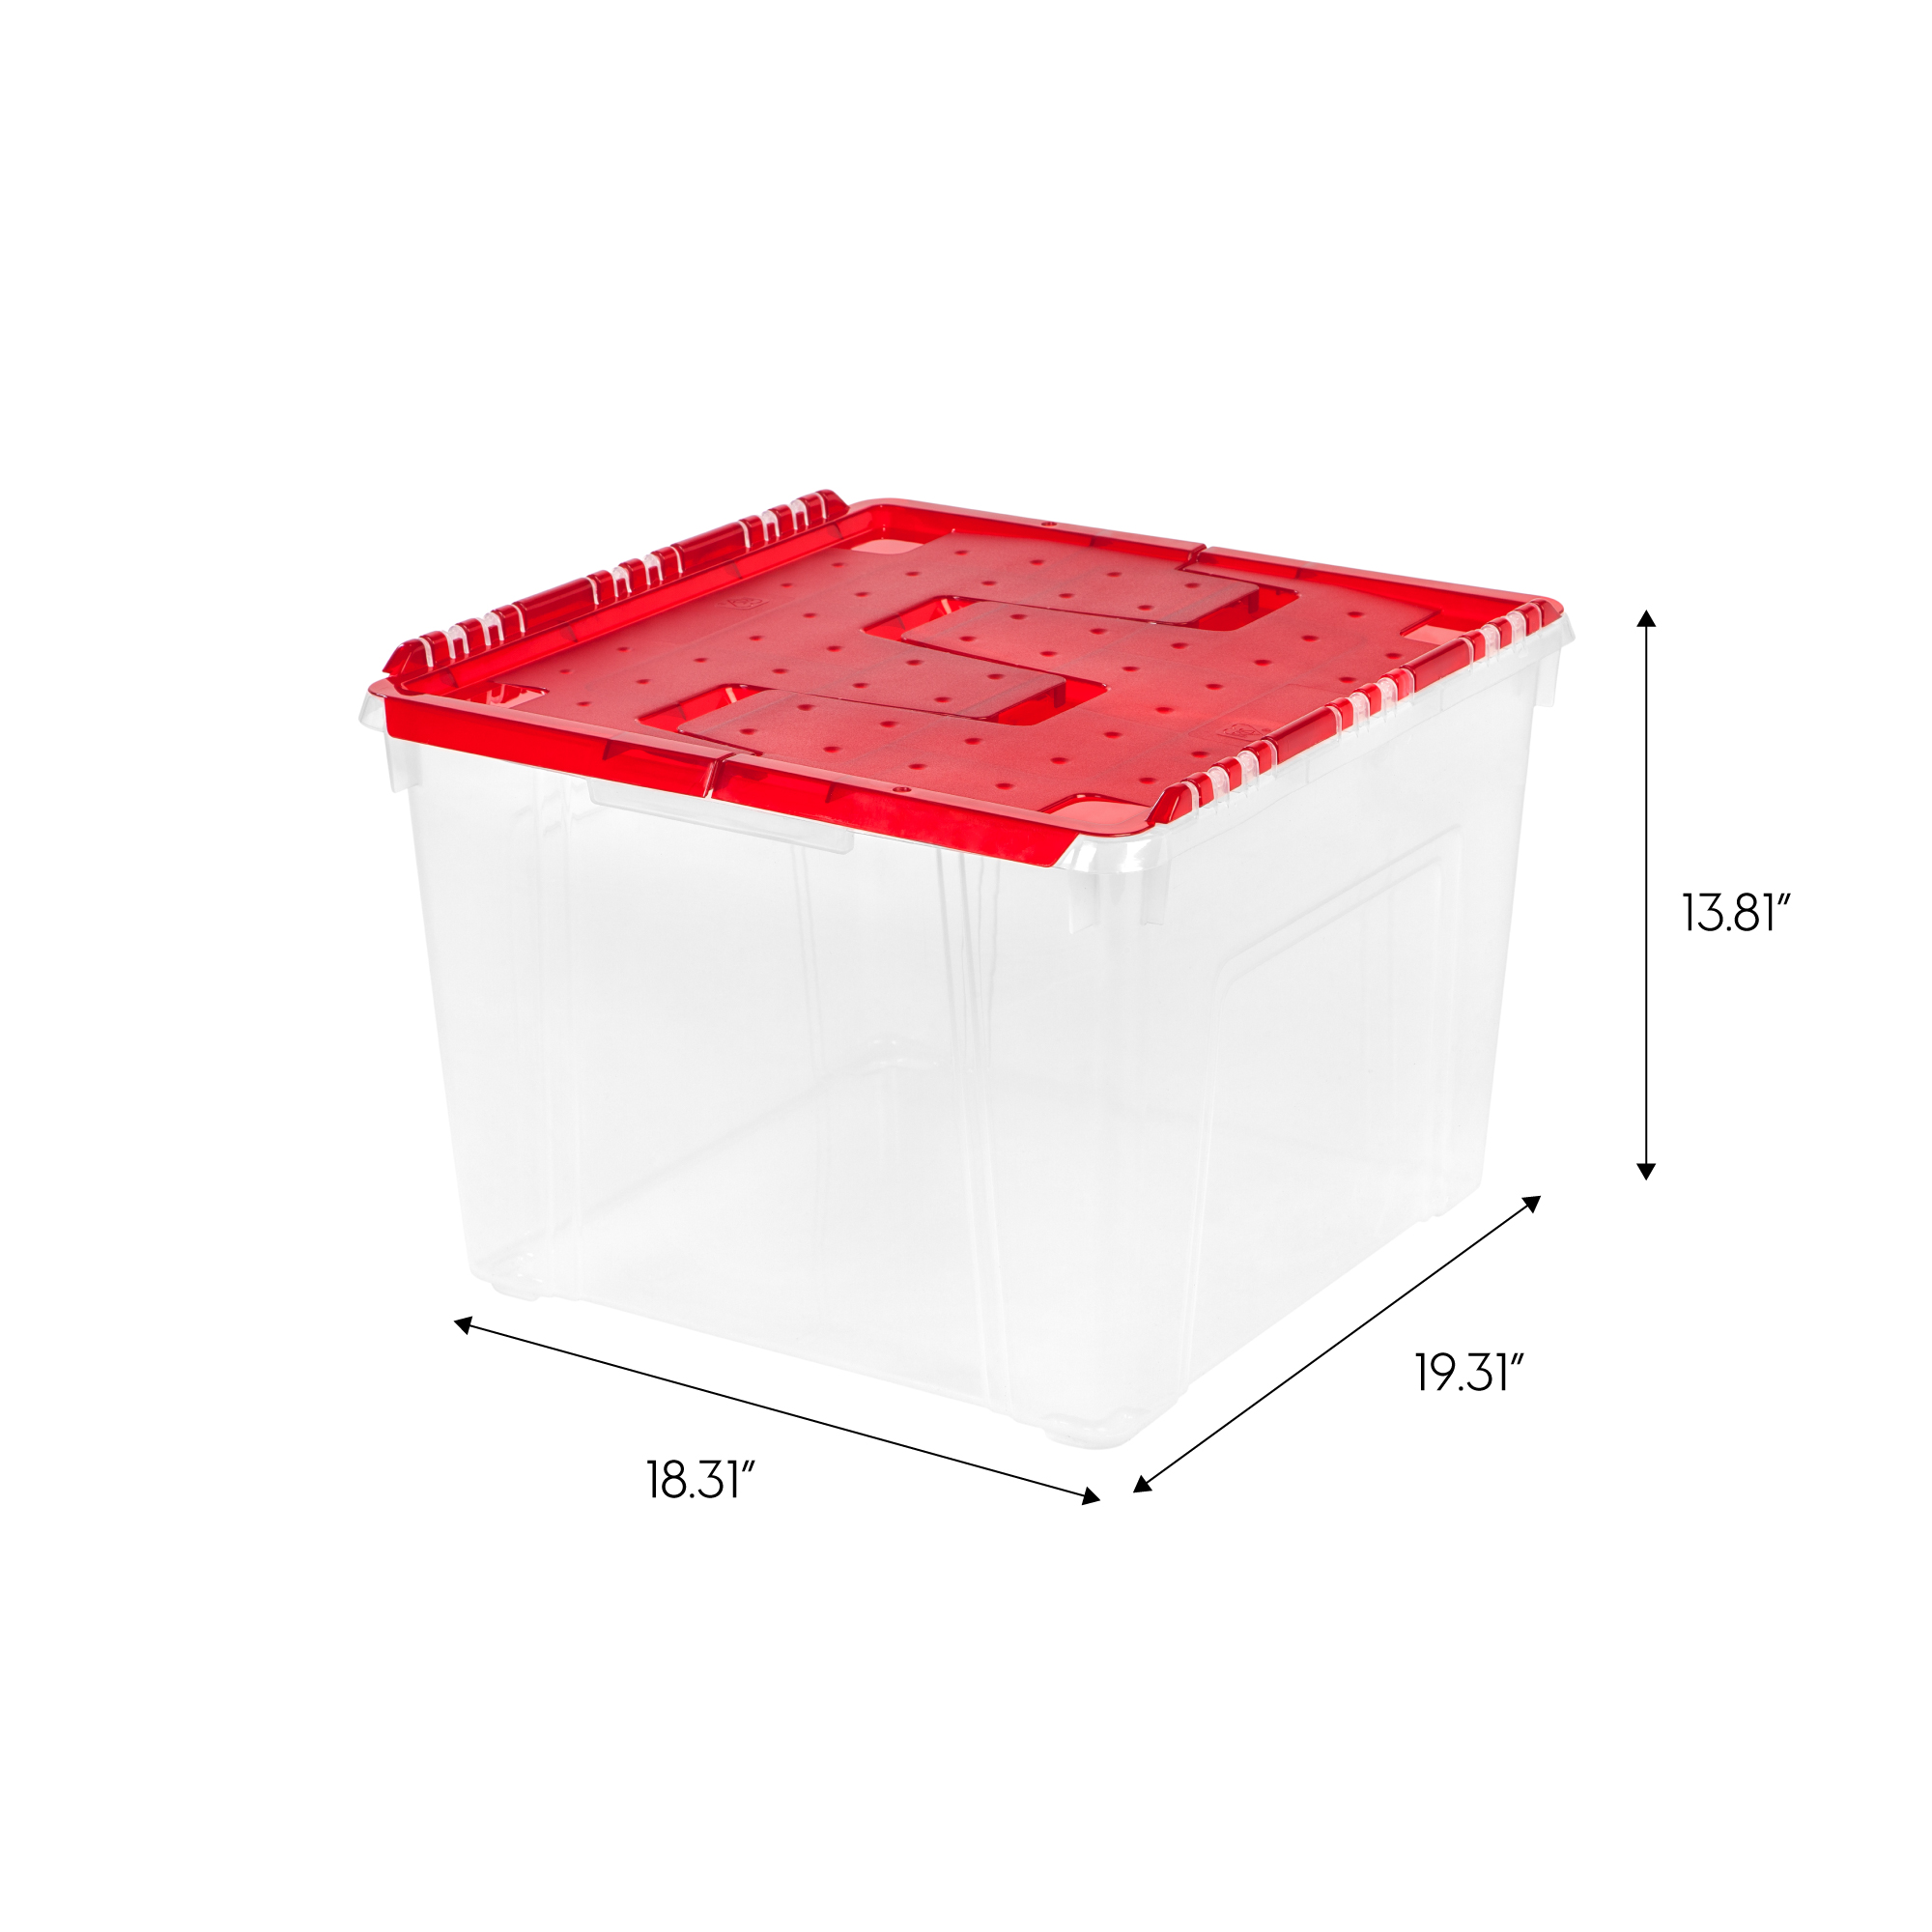 IRIS USA WL-60 Holiday Wing-Lid Box with Ornament Dividers, Red - 2 count